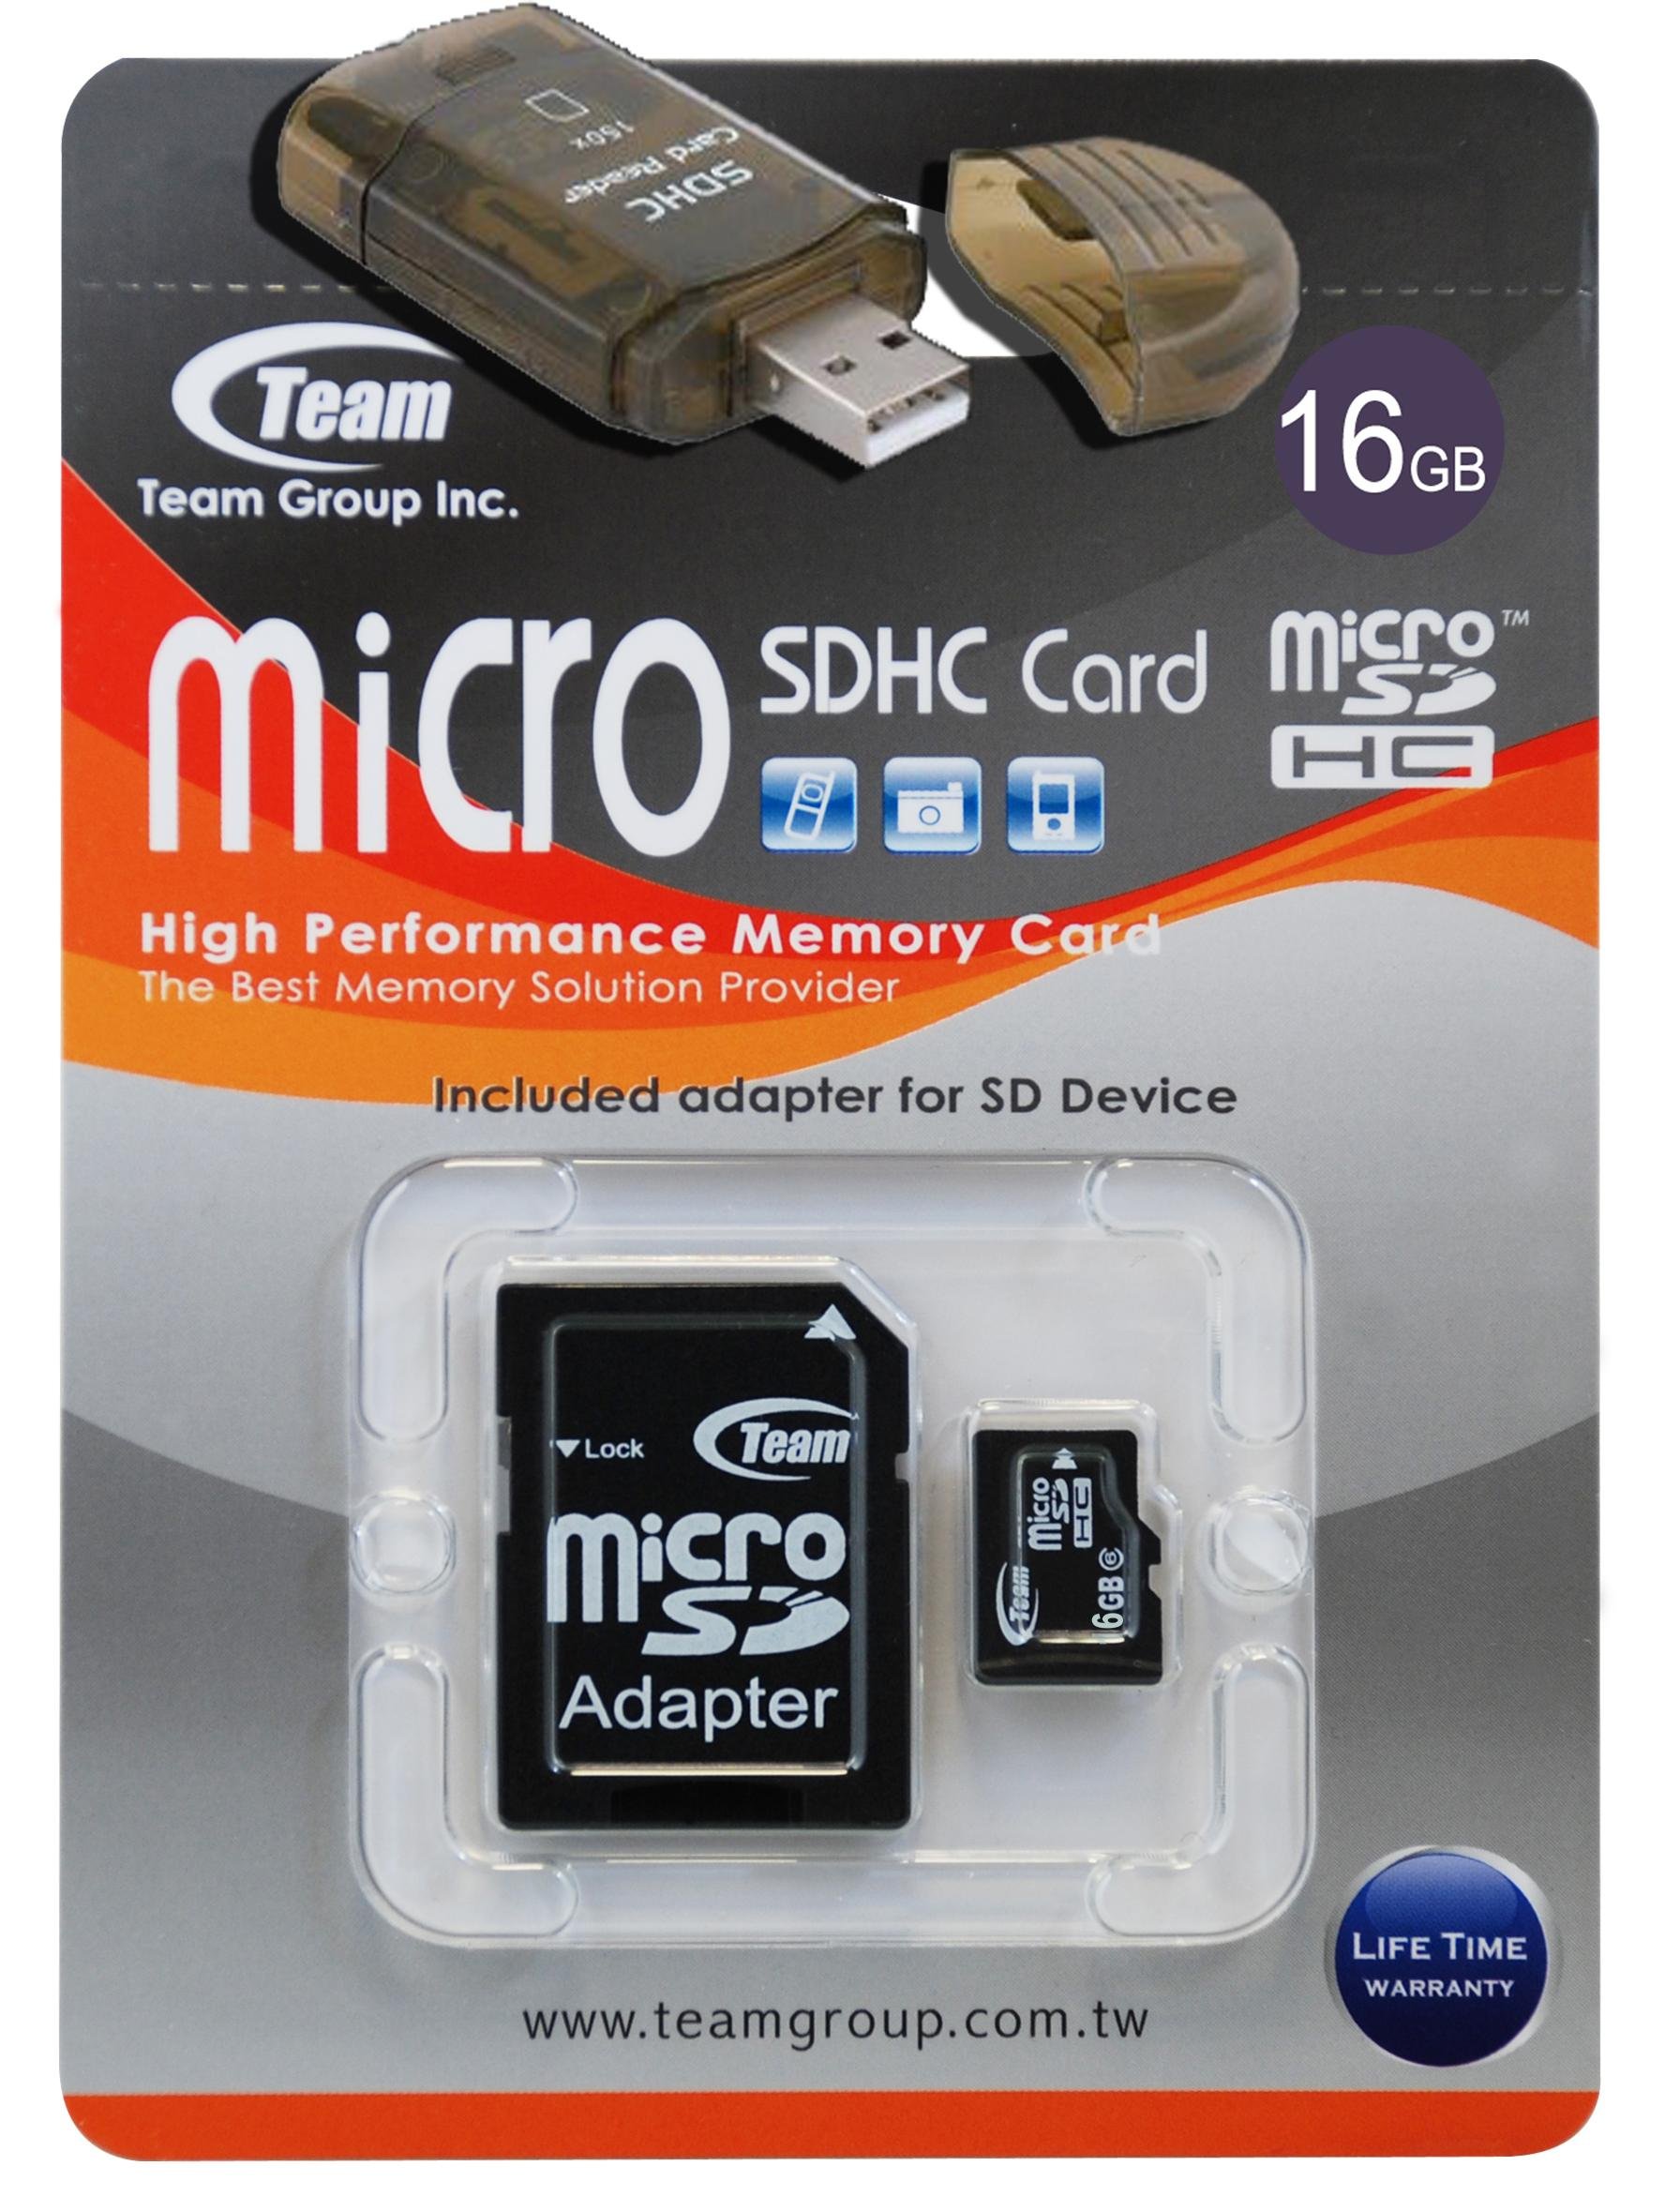 16GB Turbo Speed Class 6 MicroSDHC Memory Card For SAMSUNG SCH-R470 SCH-R540. High Speed Card Comes with a free SD and USB Ad